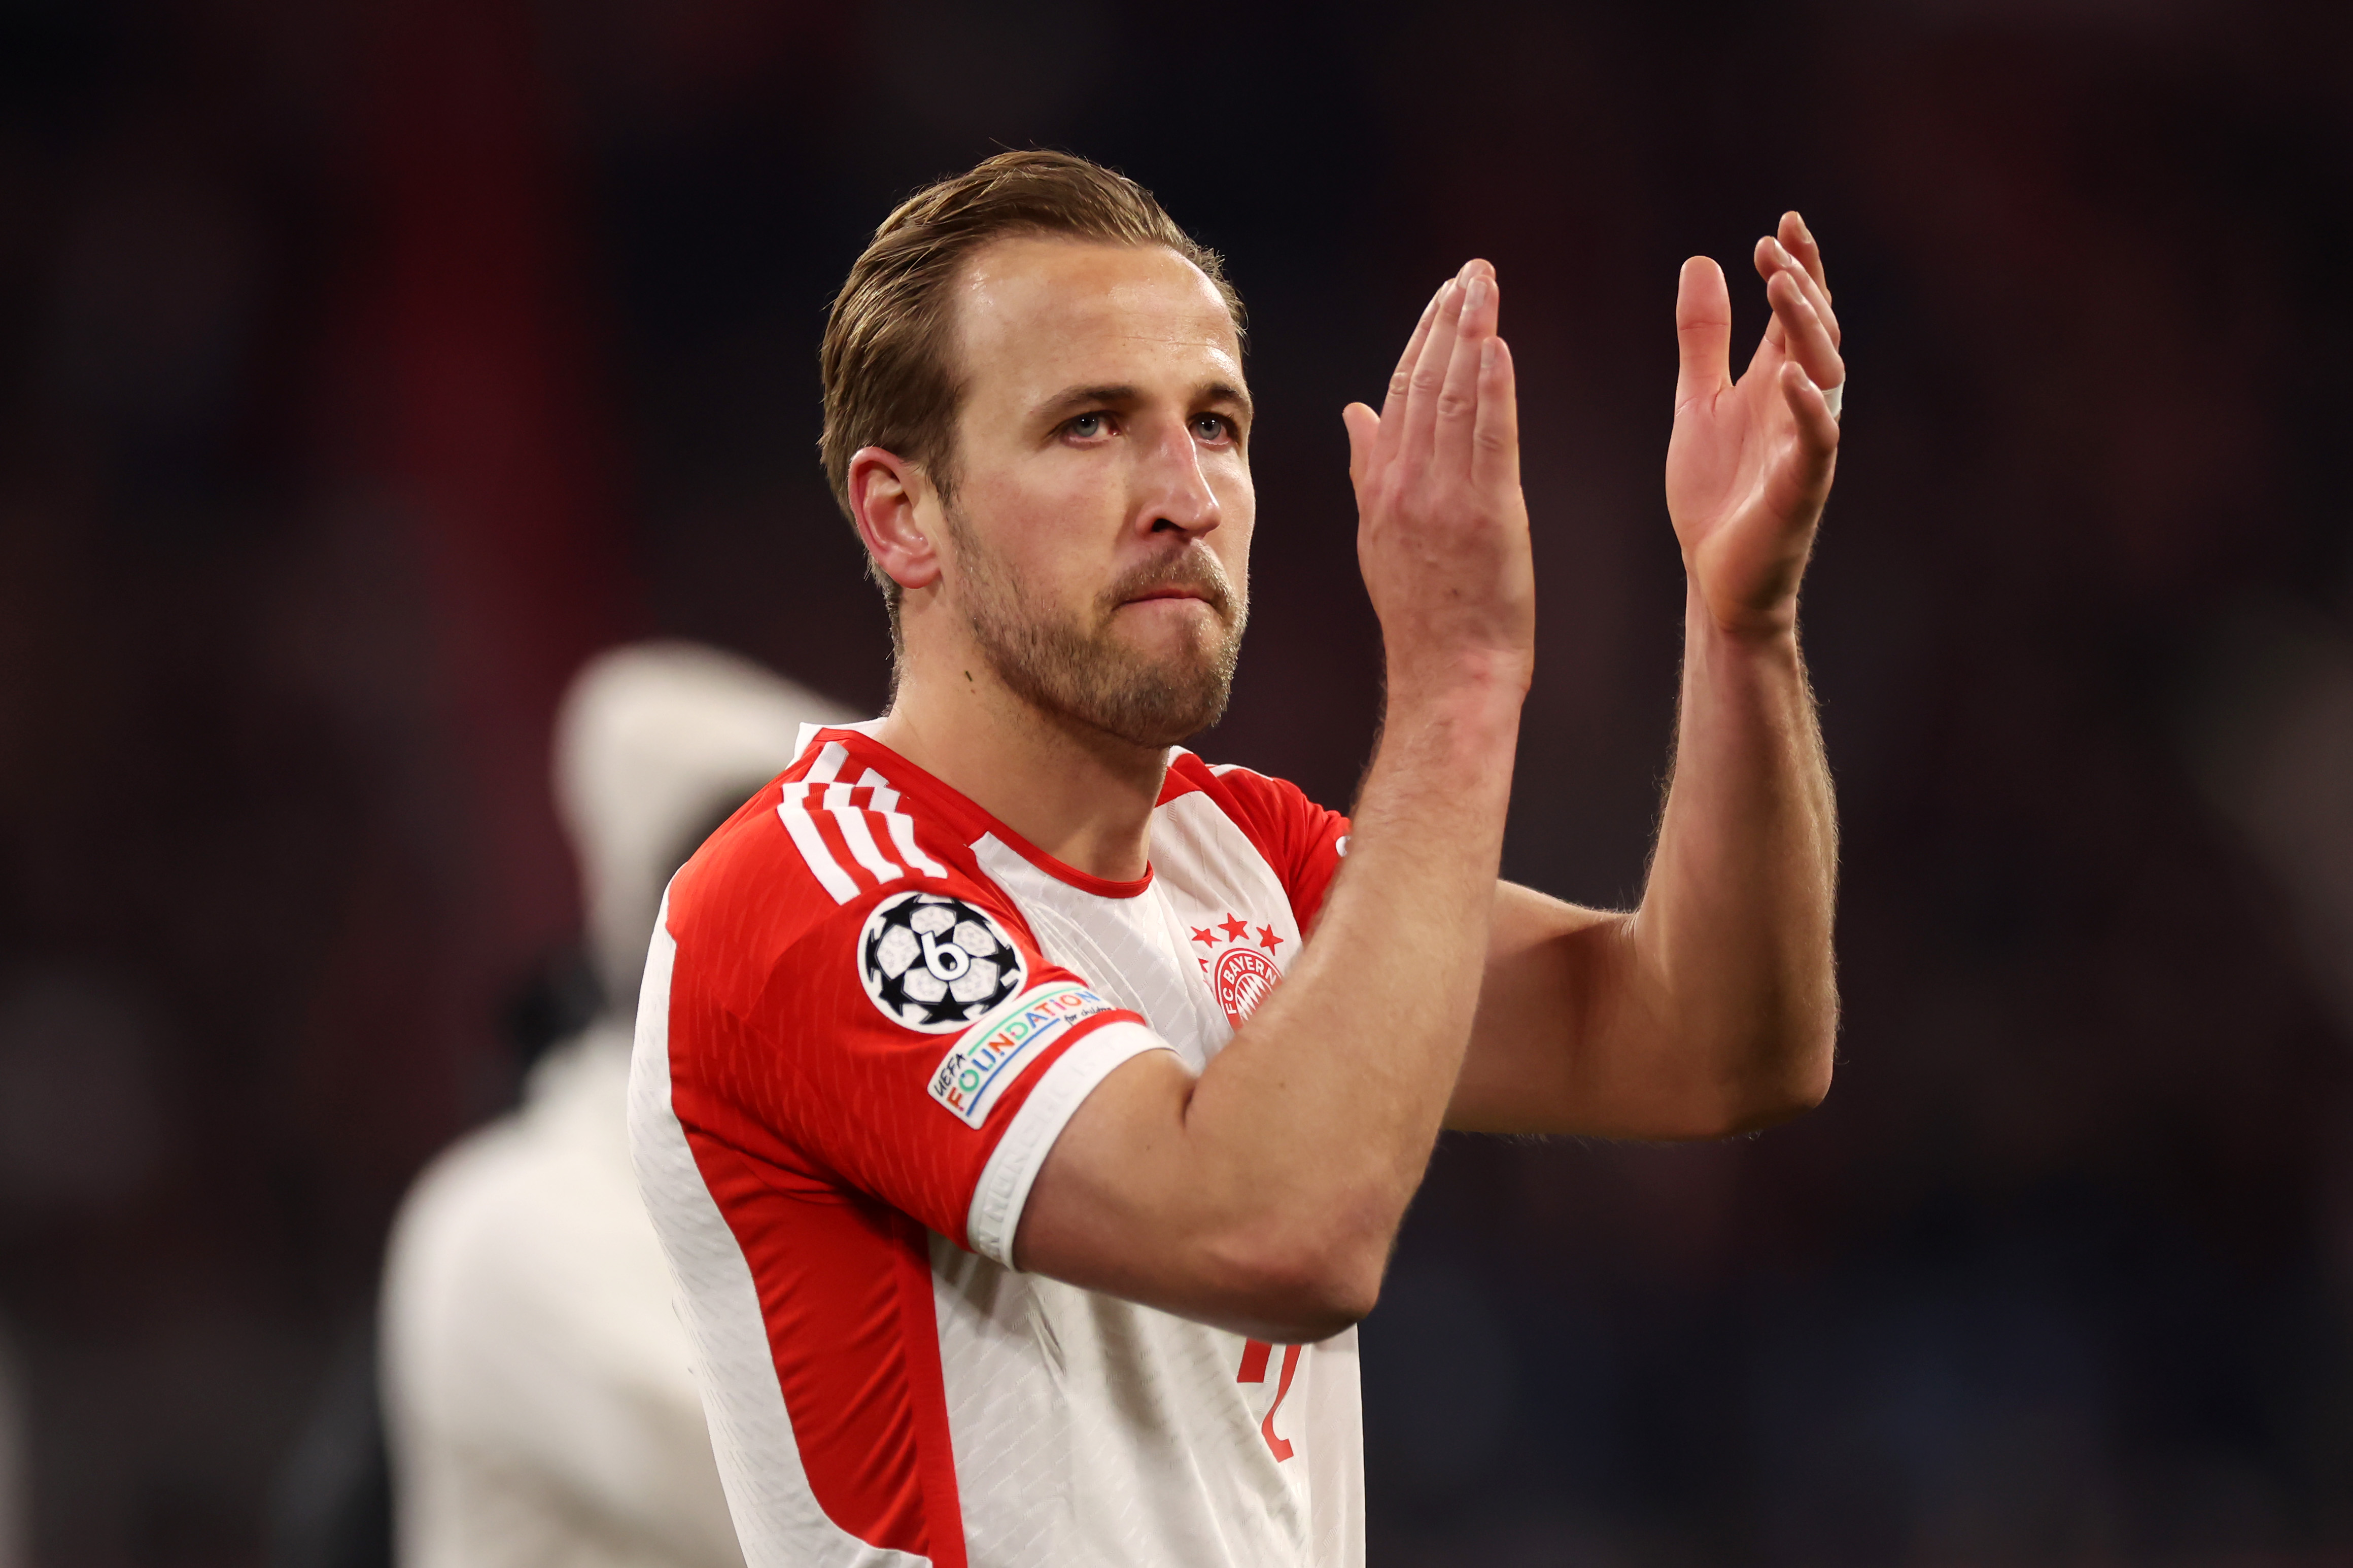 Exclusive: “He wants to come home” – Chelsea tipped for Harry Kane switch by Collymore